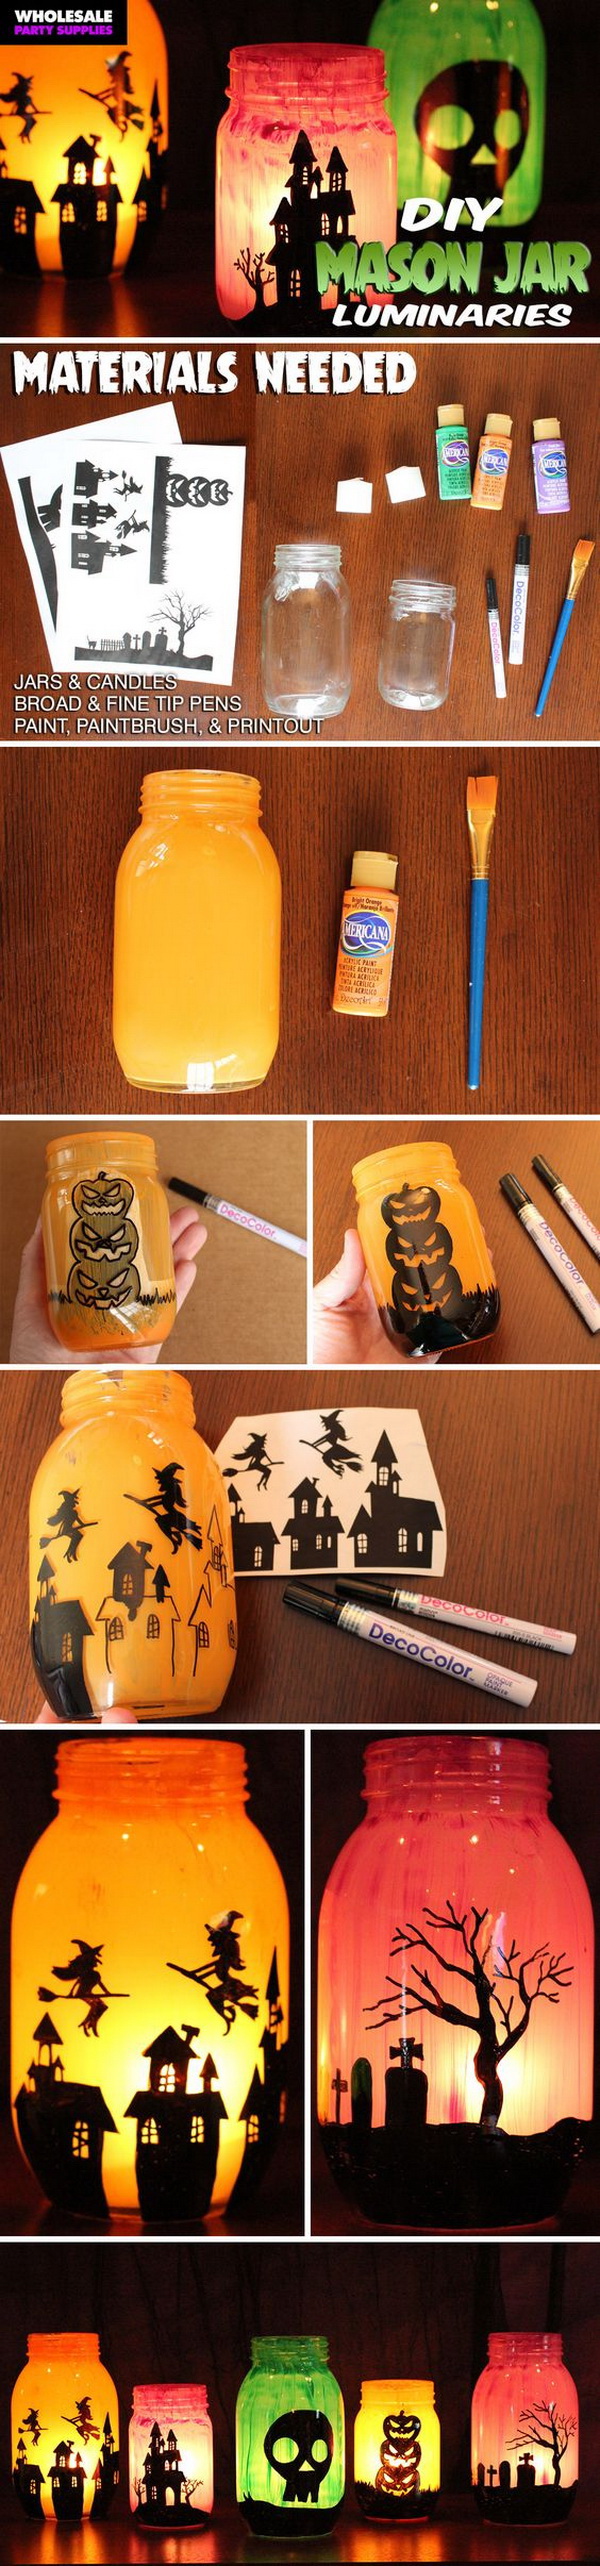 DIY Mason Jar Luminaries. Add a cute and spooky touch to your home with these haunting luminaries that decorated with free printable templates full of spooky characters. They look great either in the dark or in the light! 